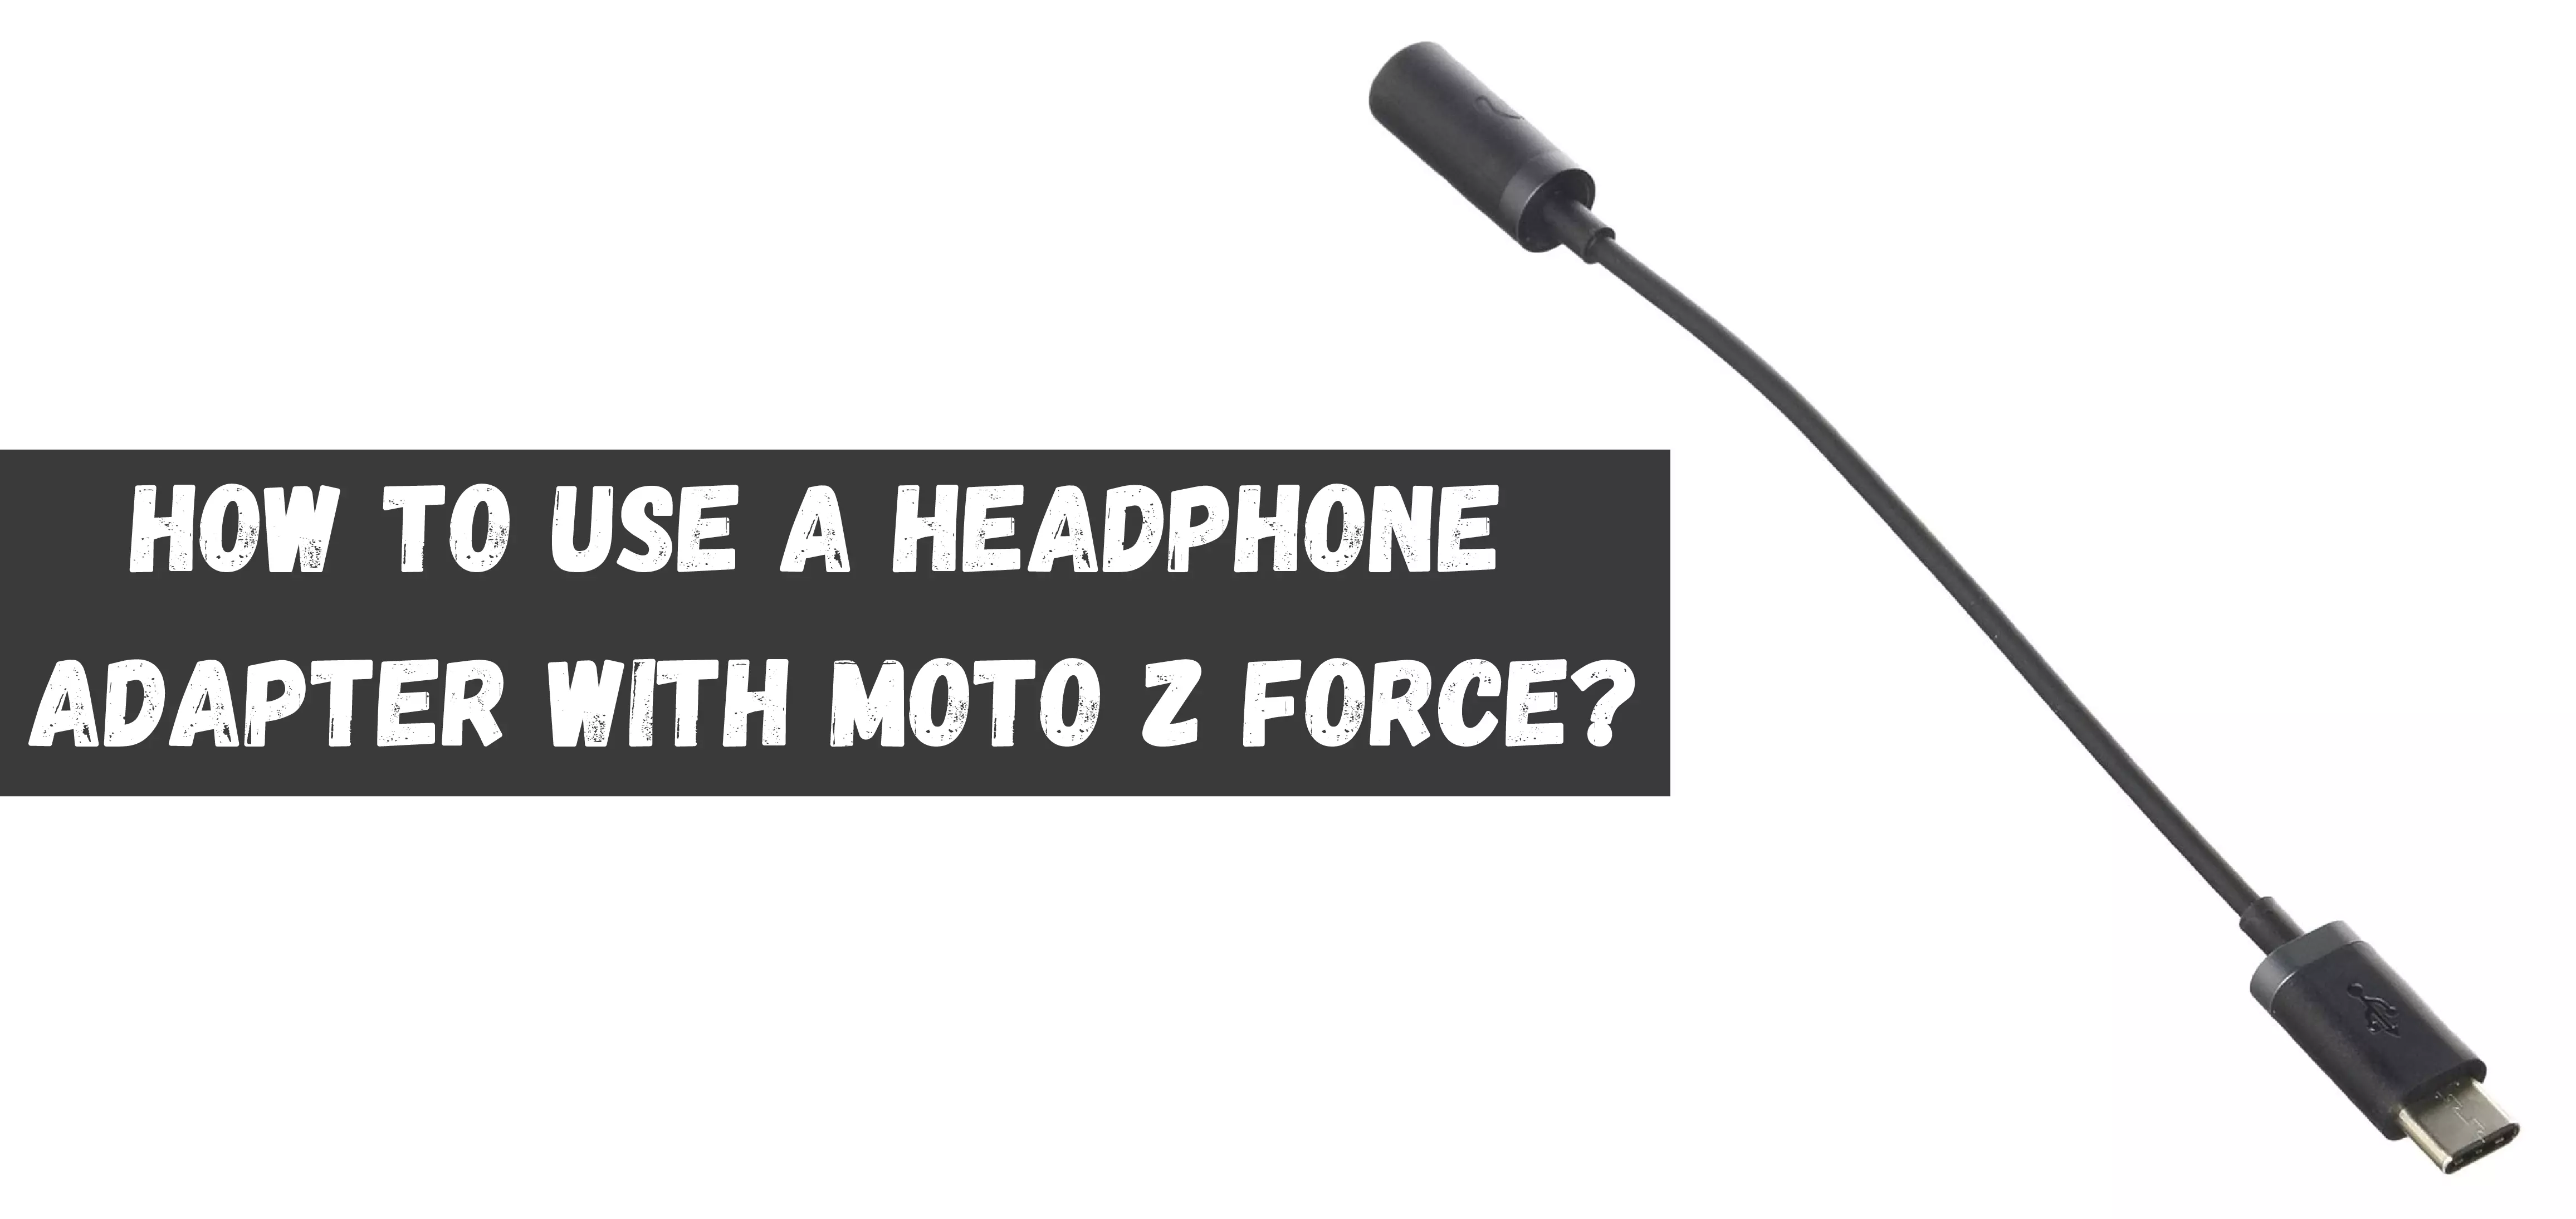 How to Use a Headphone Adapter with Moto Z force